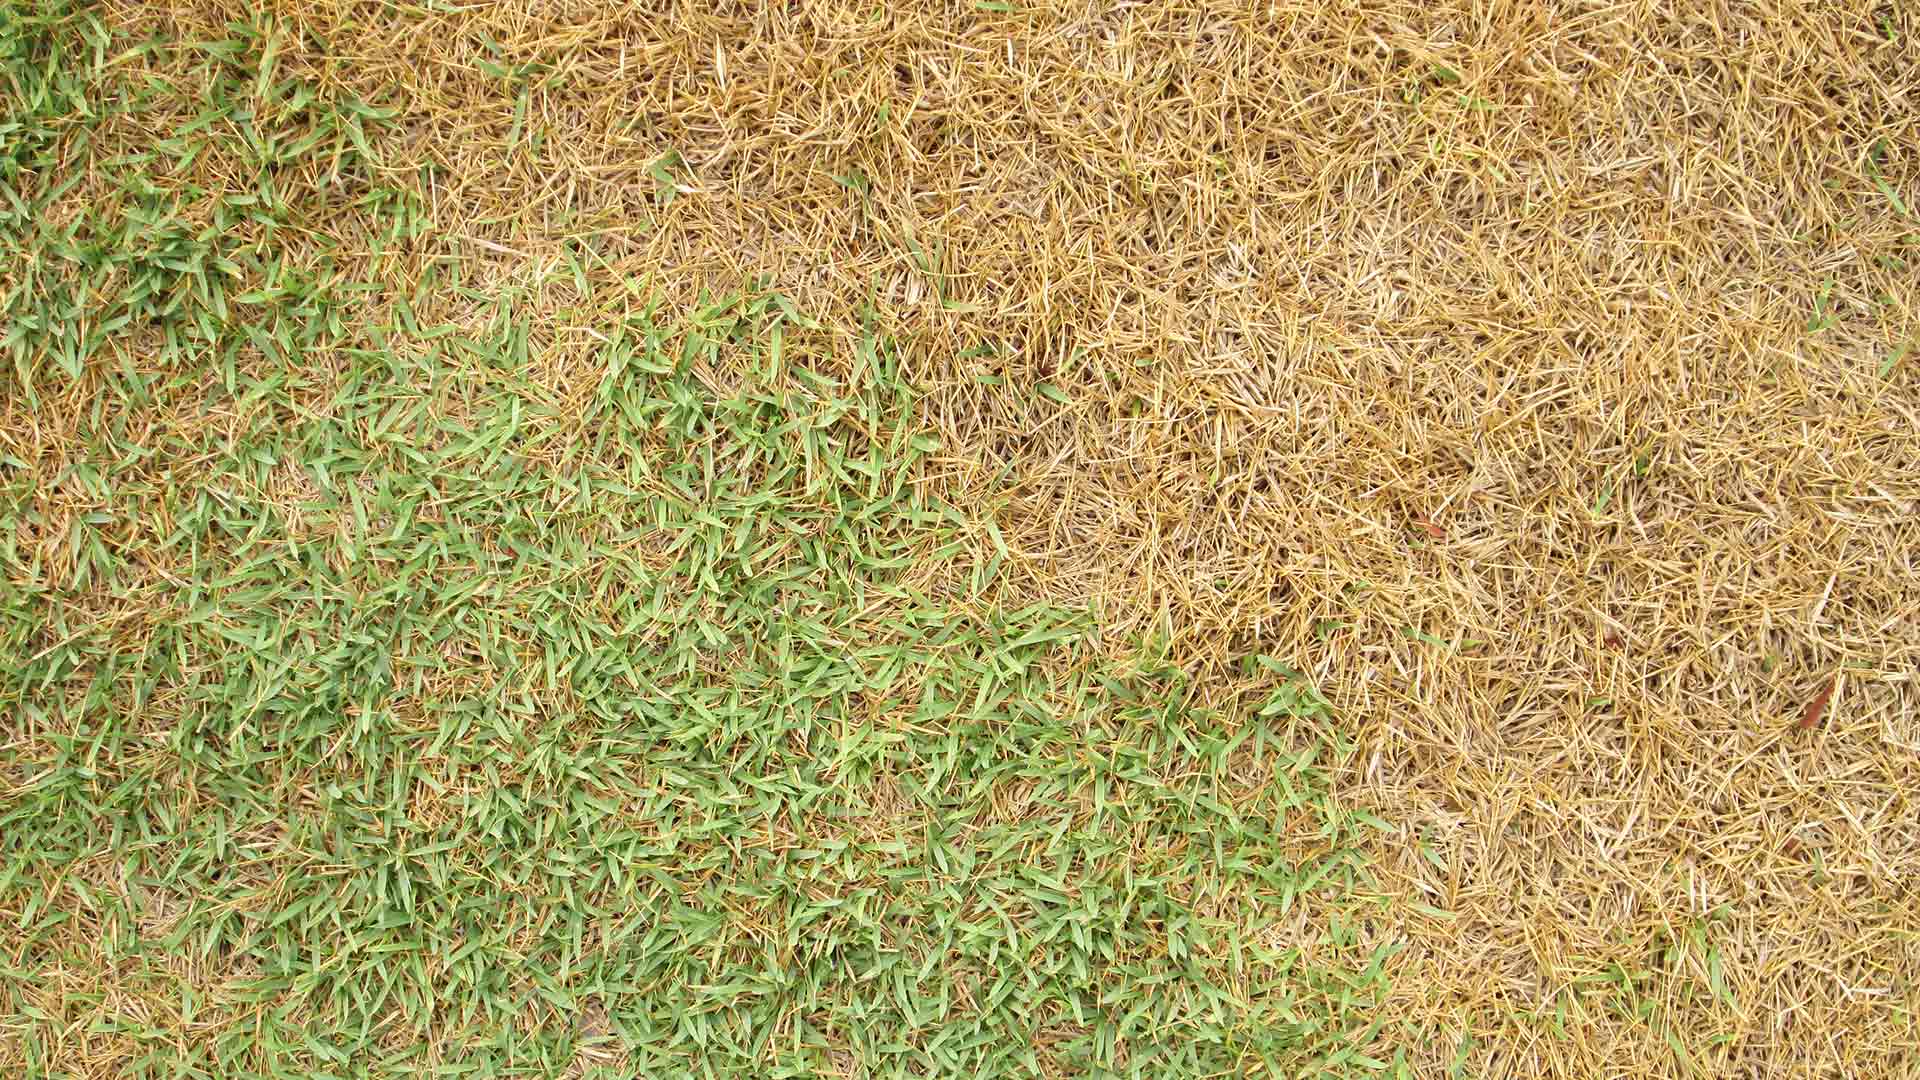 Suspect a Lawn Disease Has Infected Your Lawn? Here’s What to Do